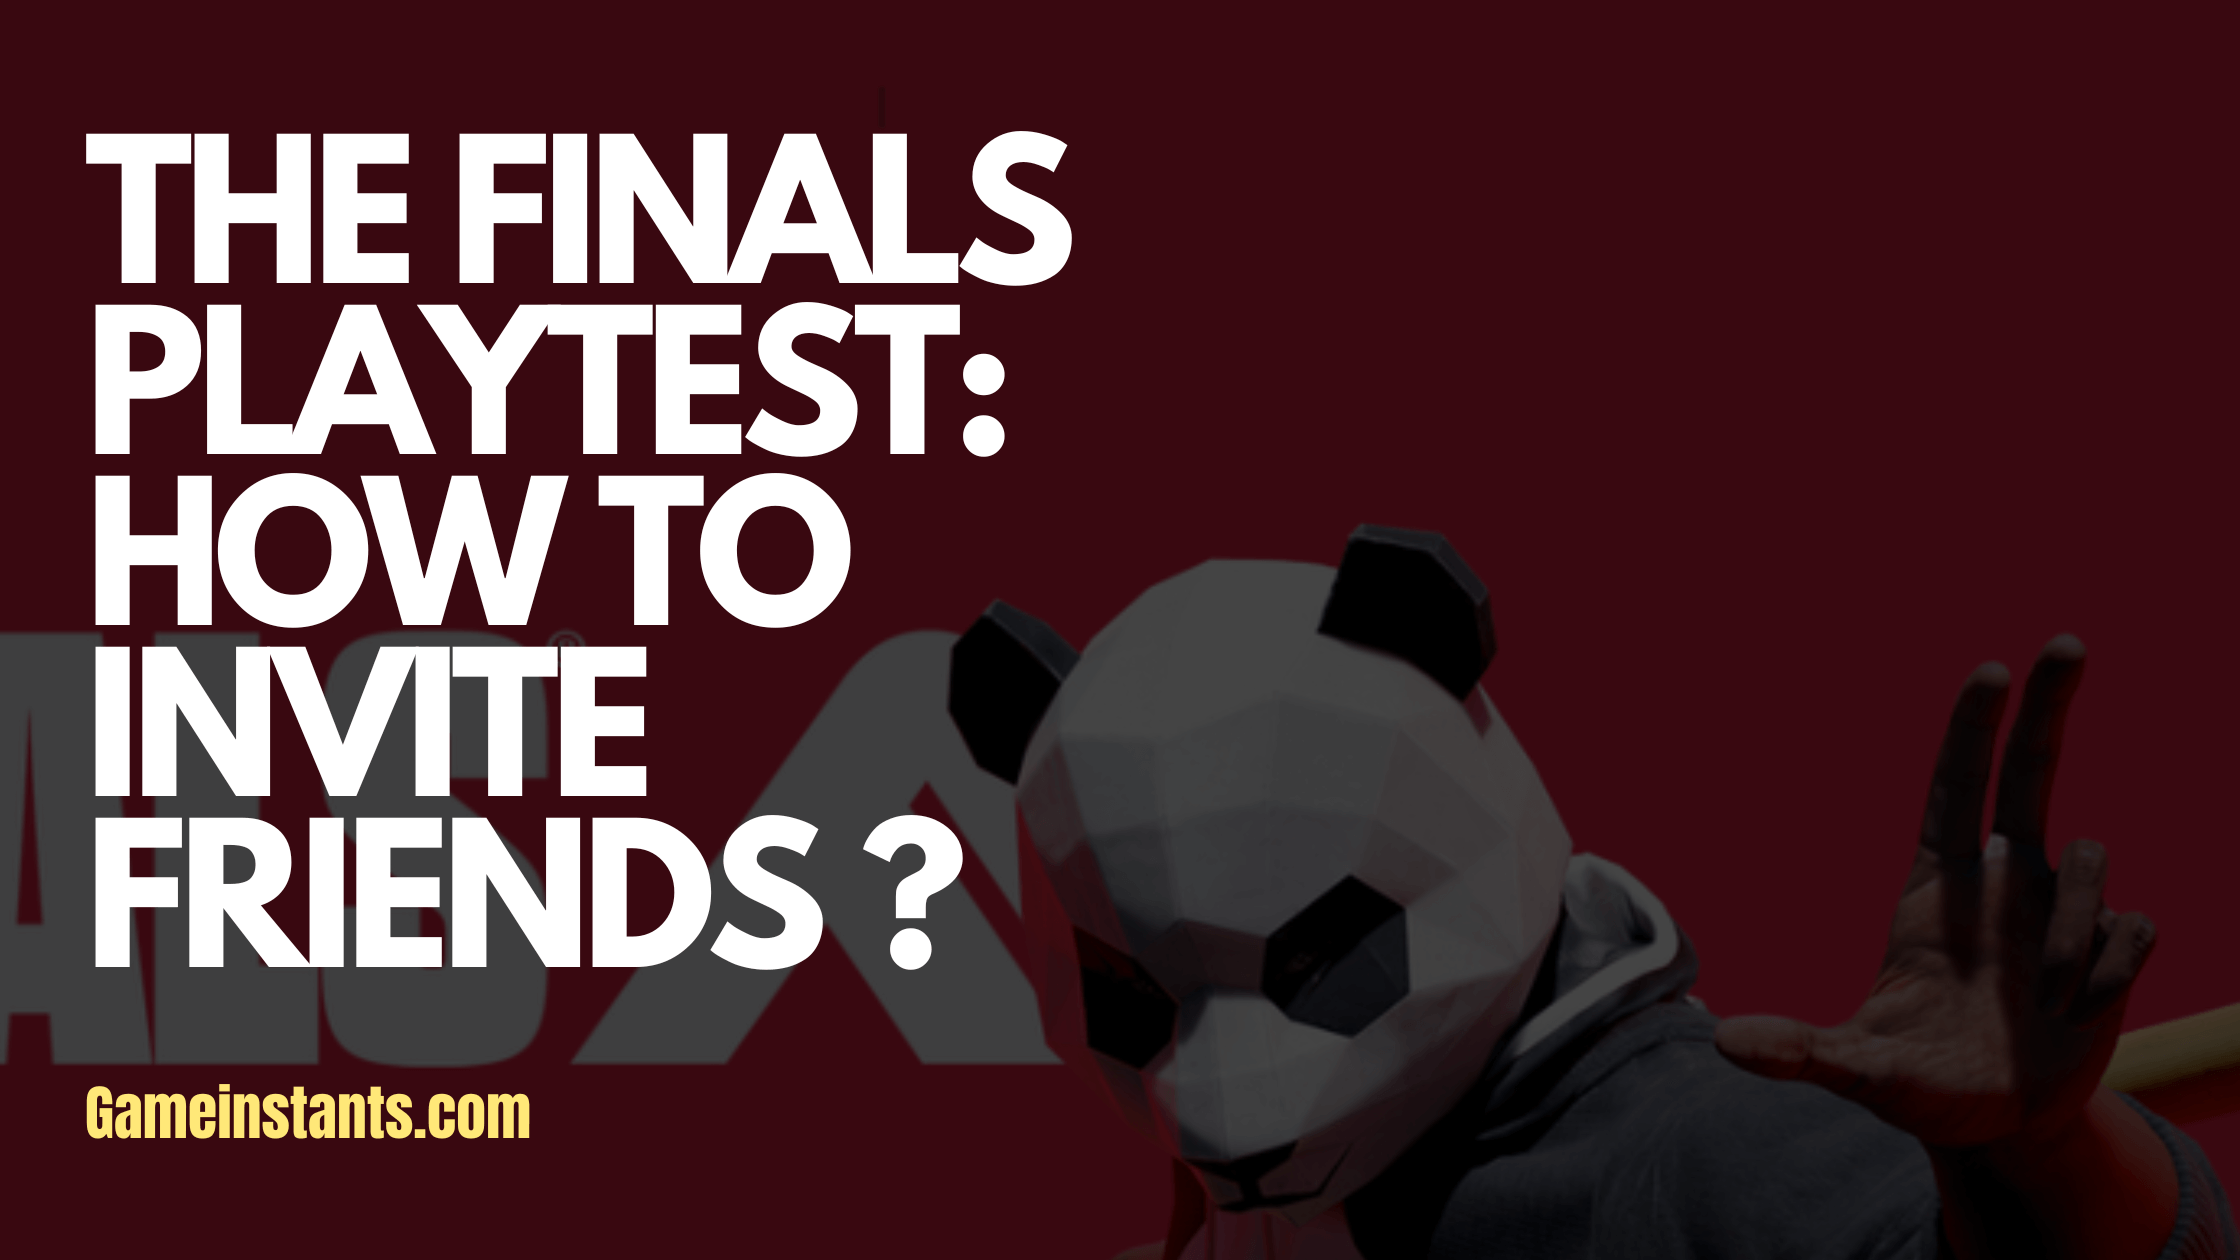 THE FINALS Playtest: How To Invite Friends